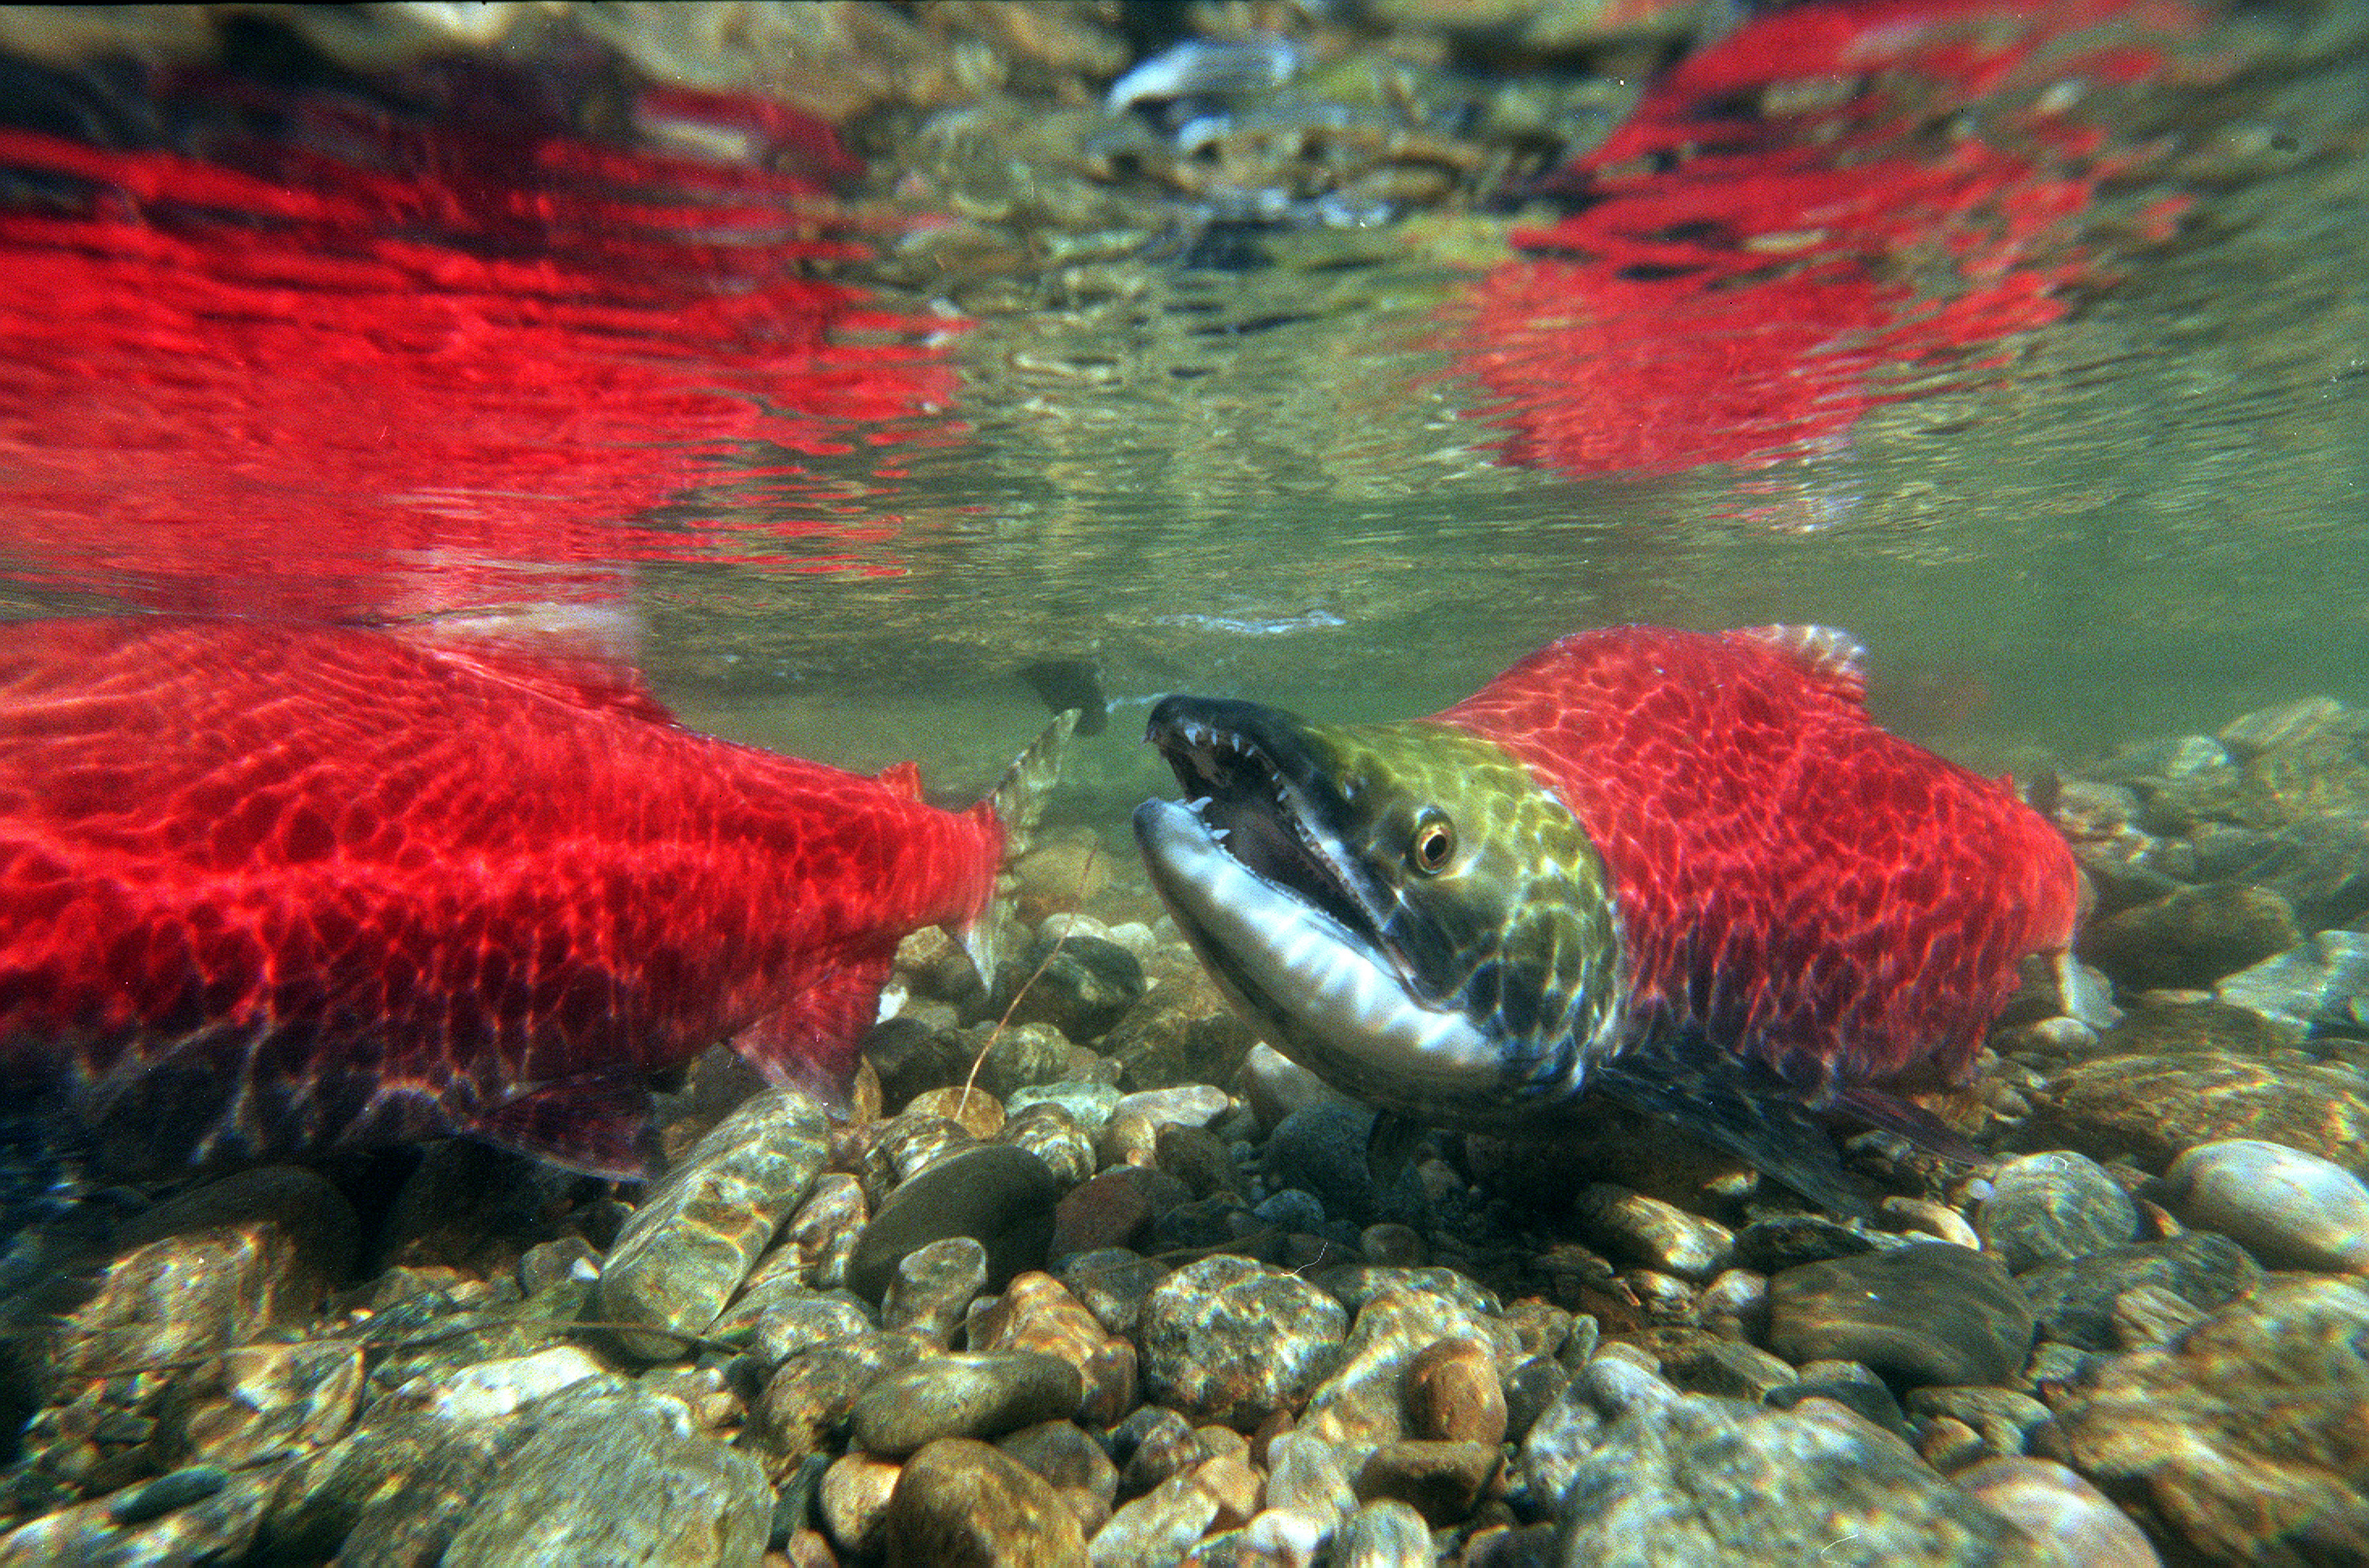 In their bright red spawning colors